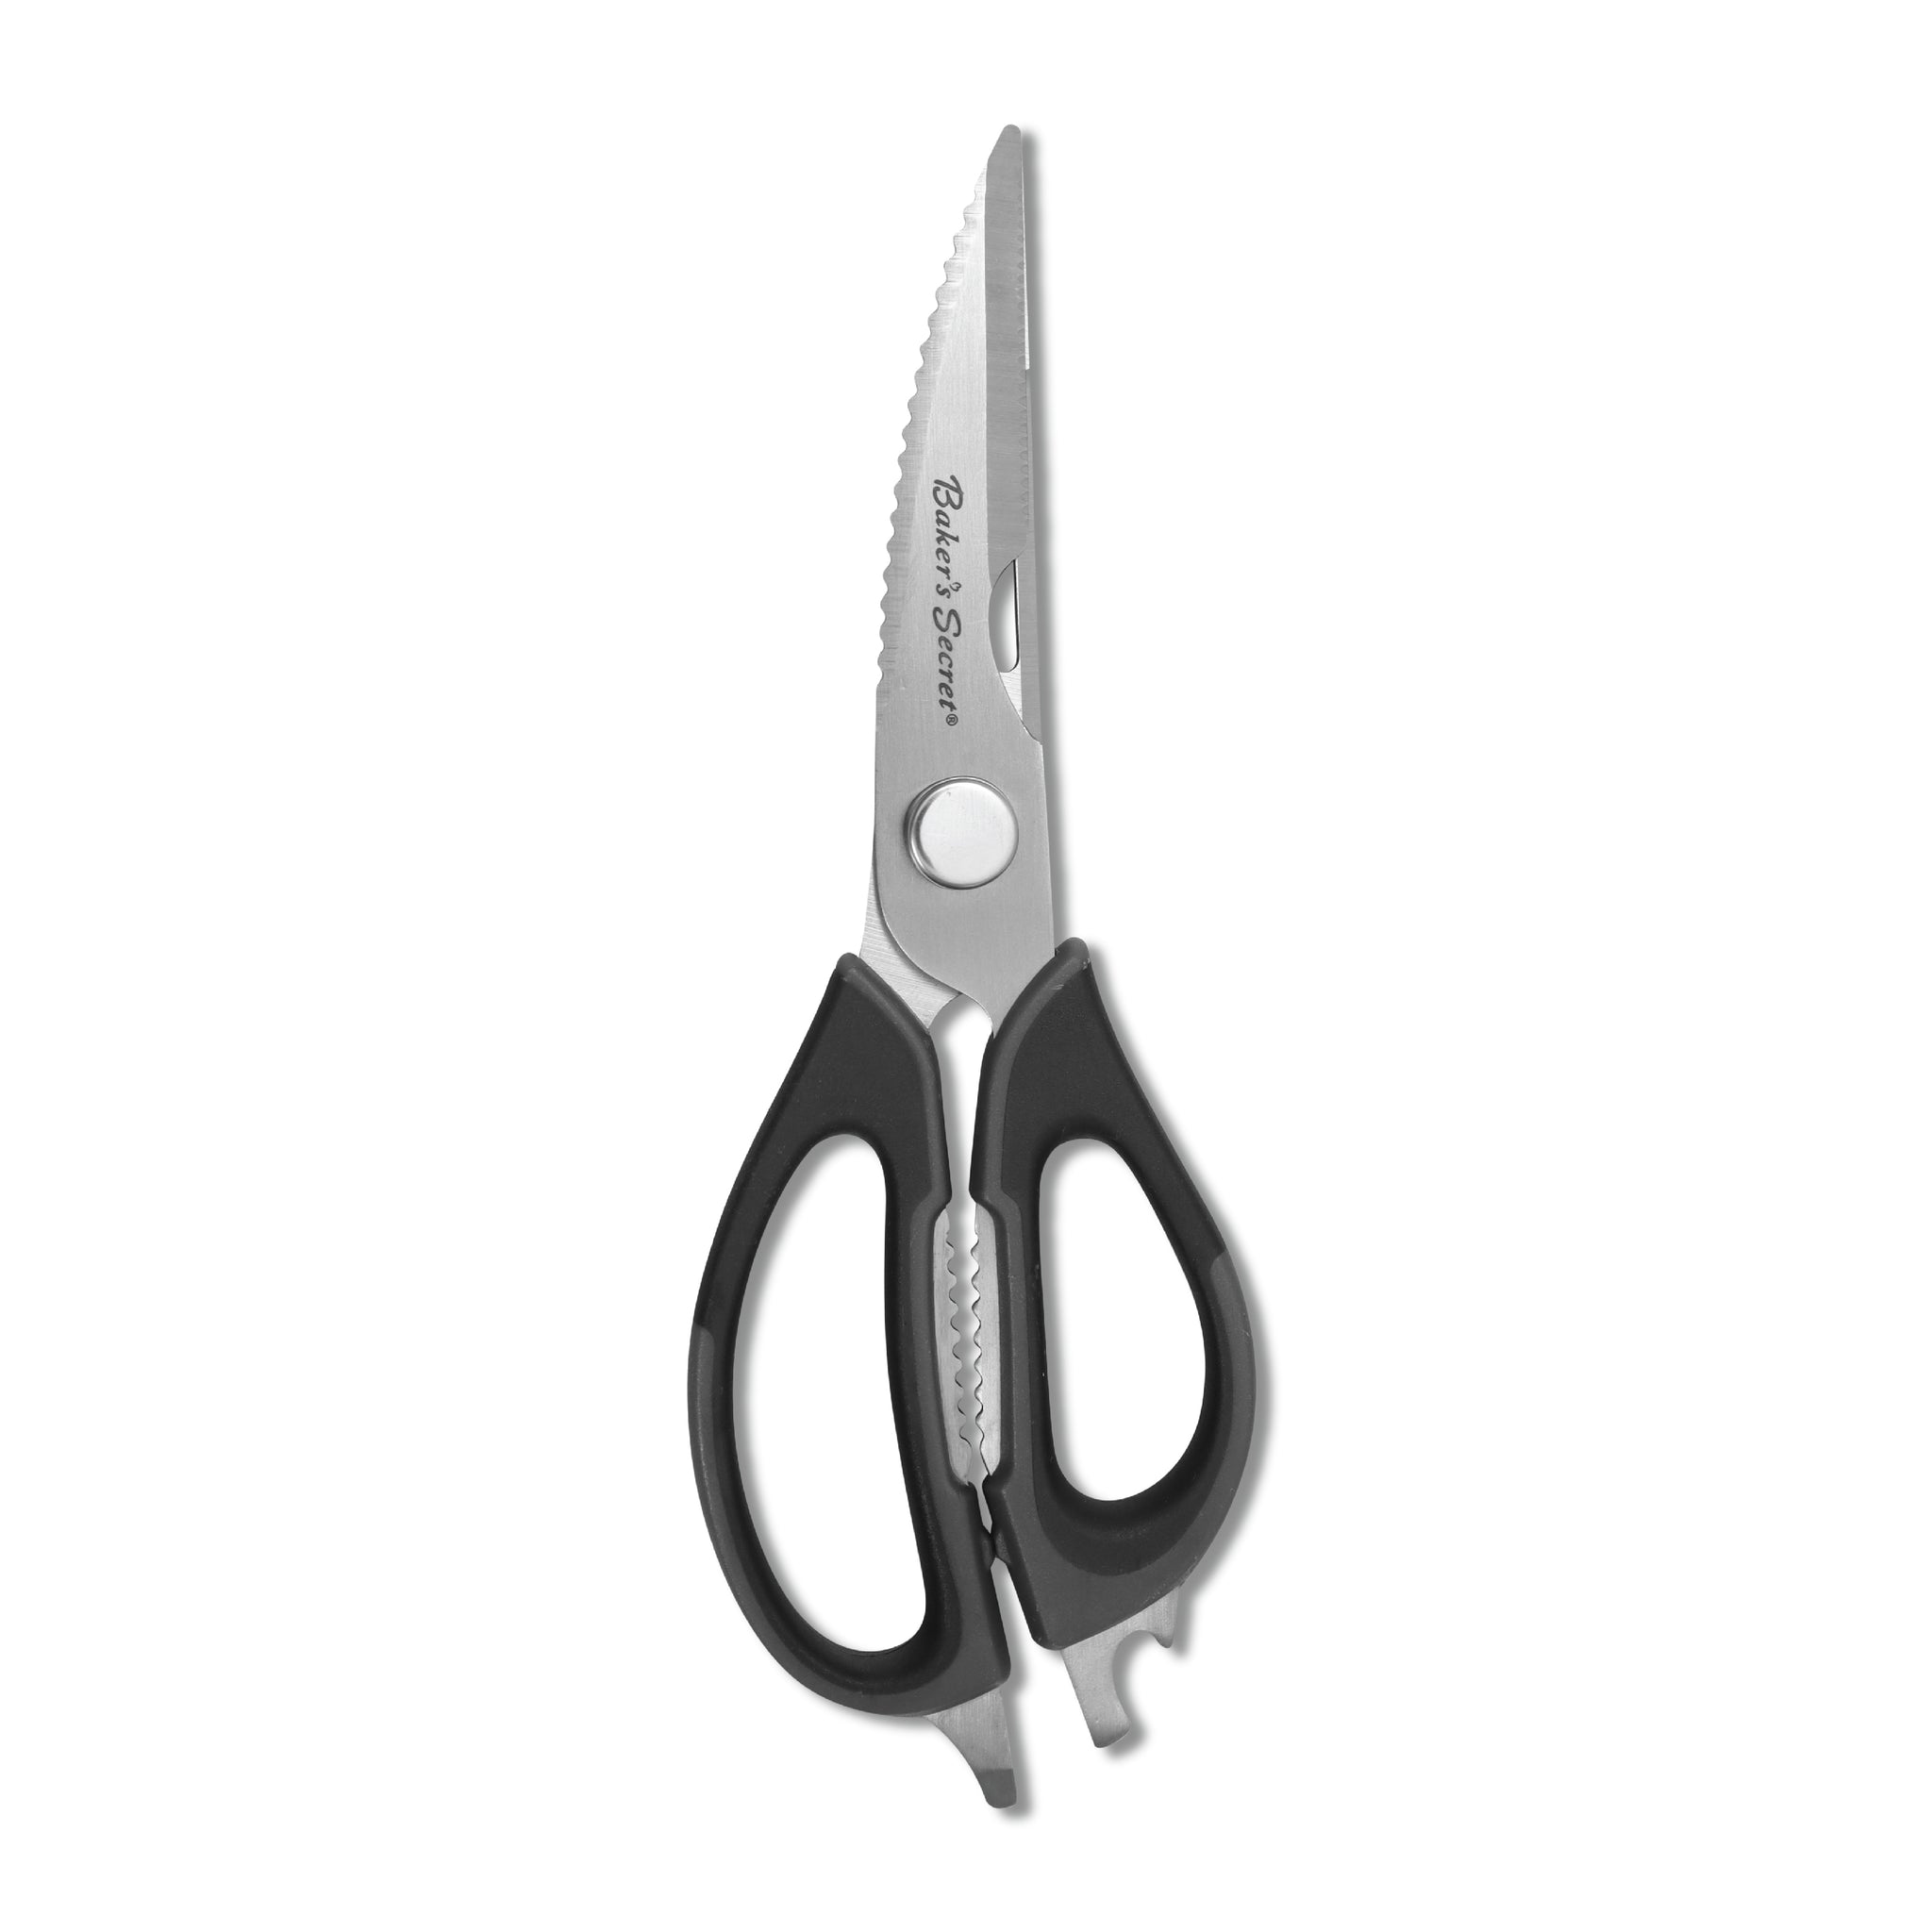 Baker Ross Multi-Purpose Scissors (Pack of 3) Stainless Steel Craft Scissors for All Arts and Crafts